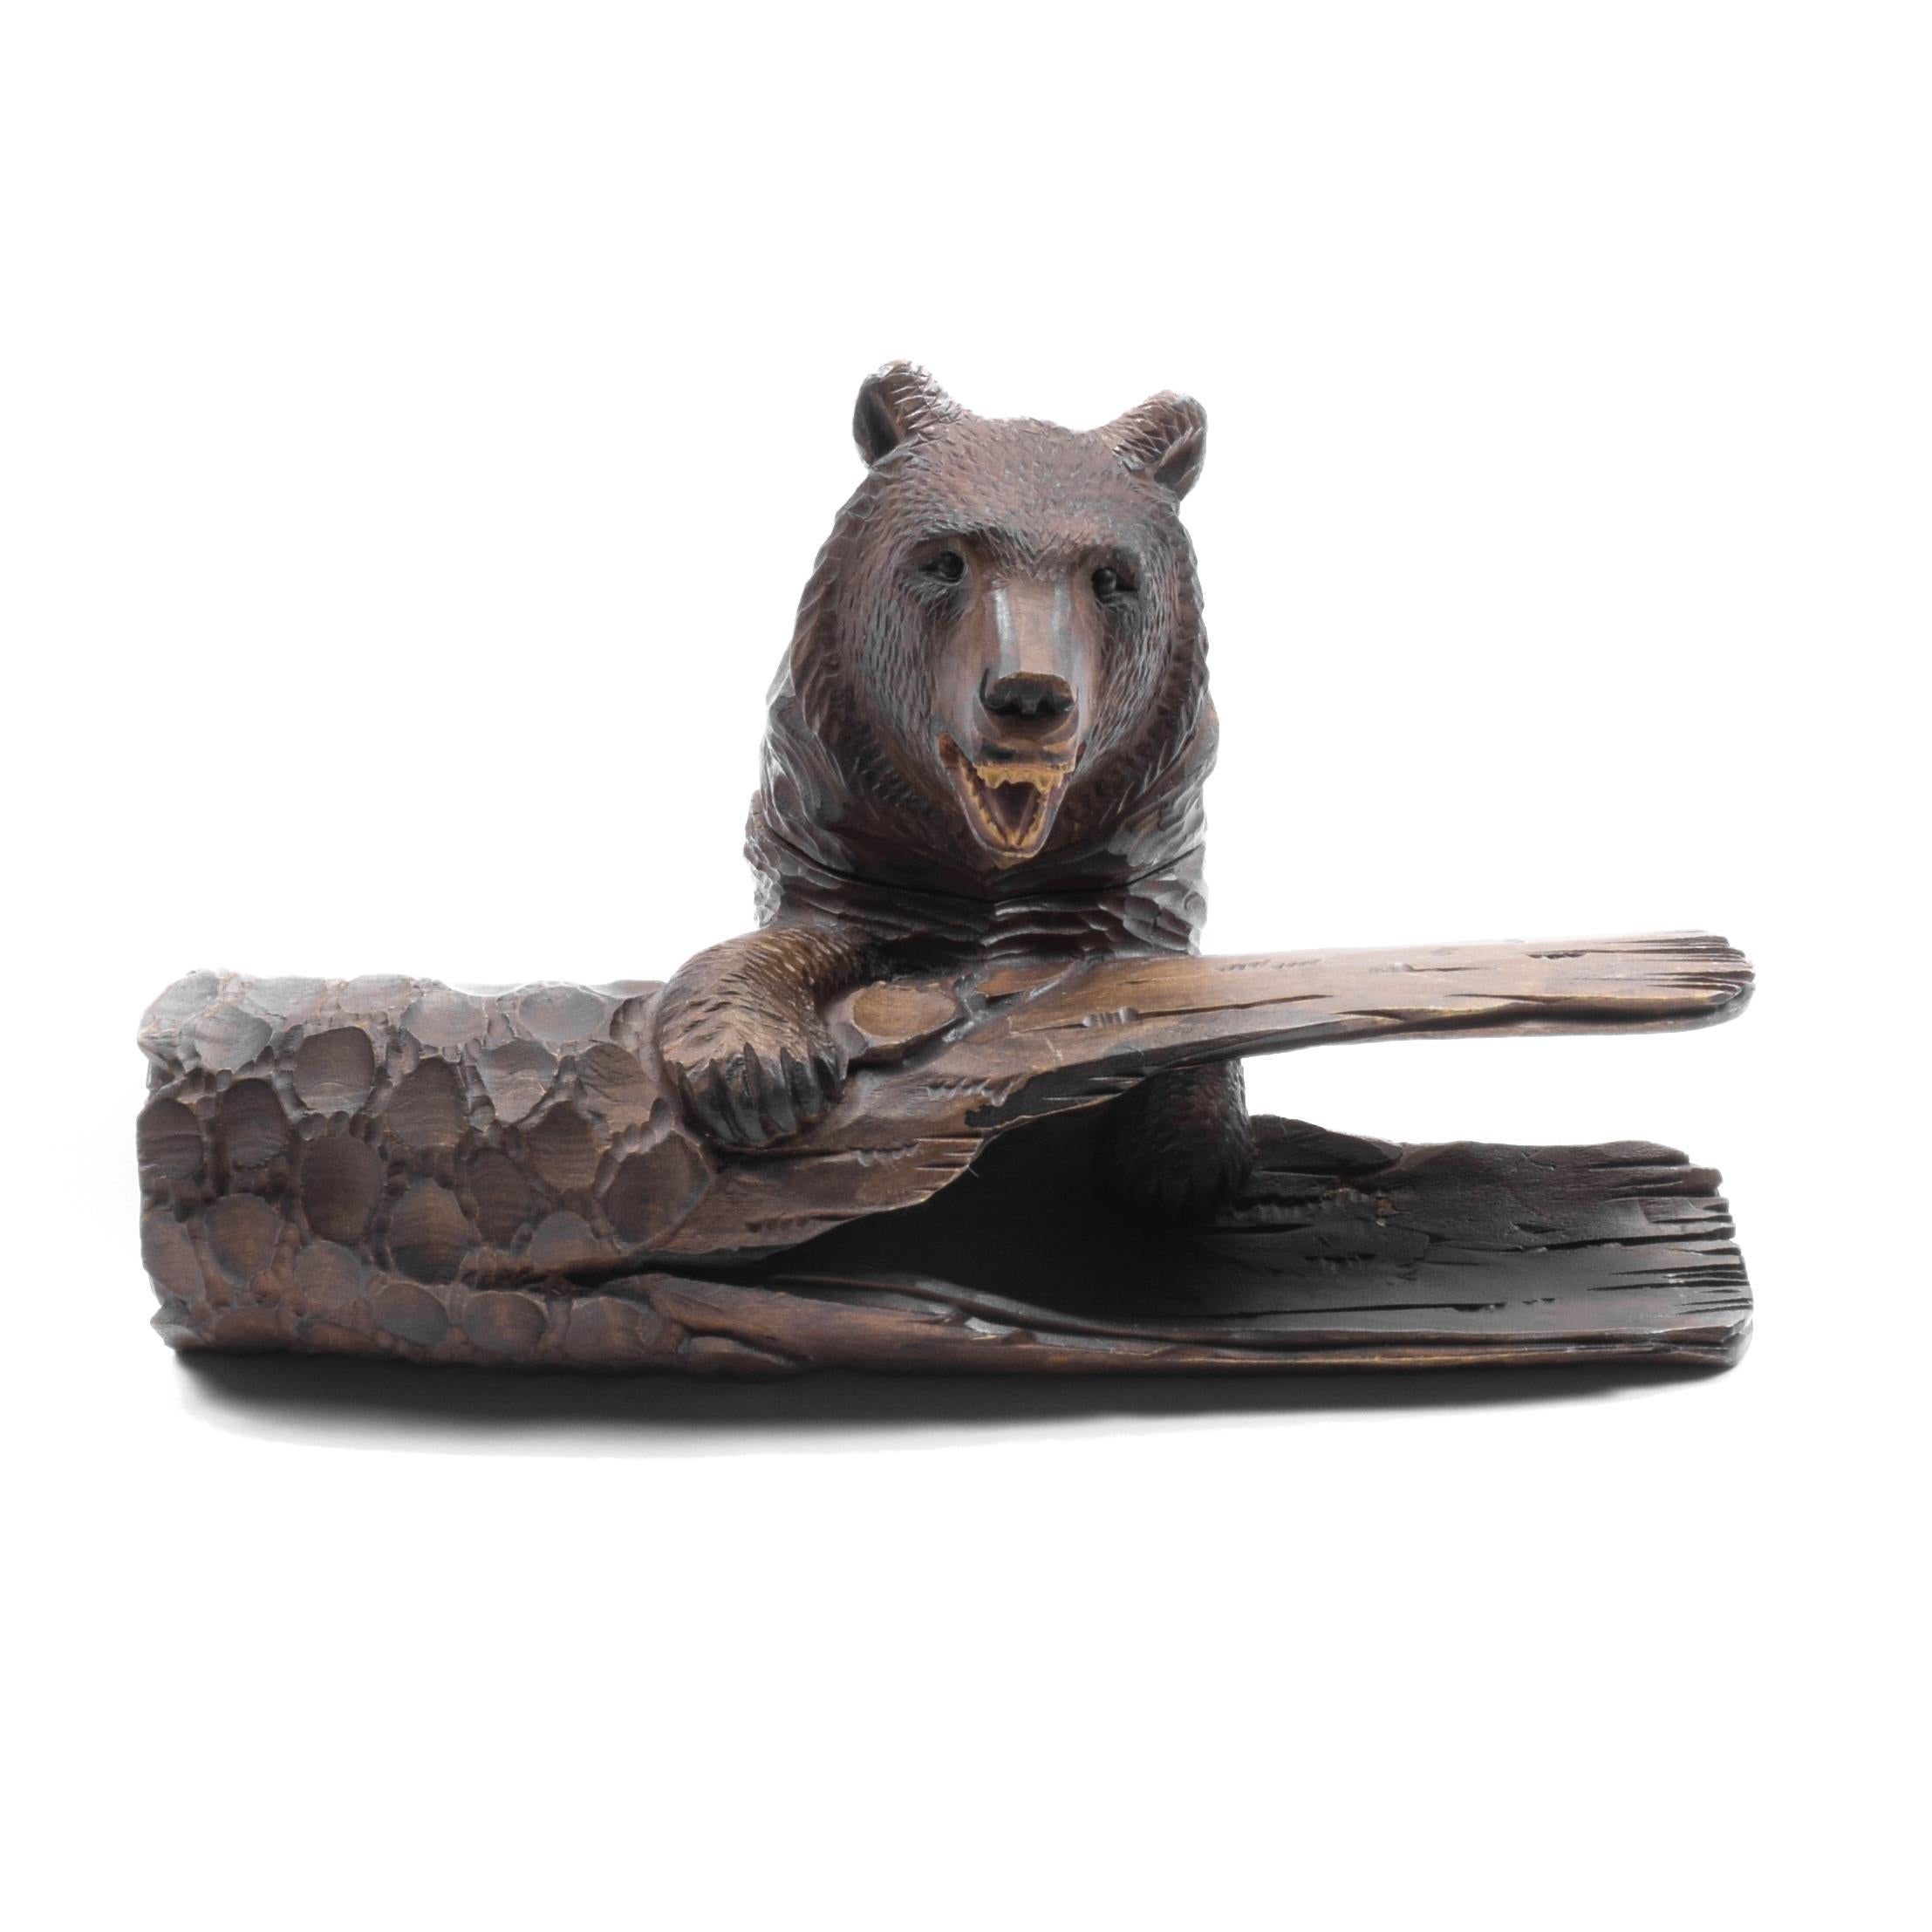 Swiss bear with log pen rest and inkwell. Published in 